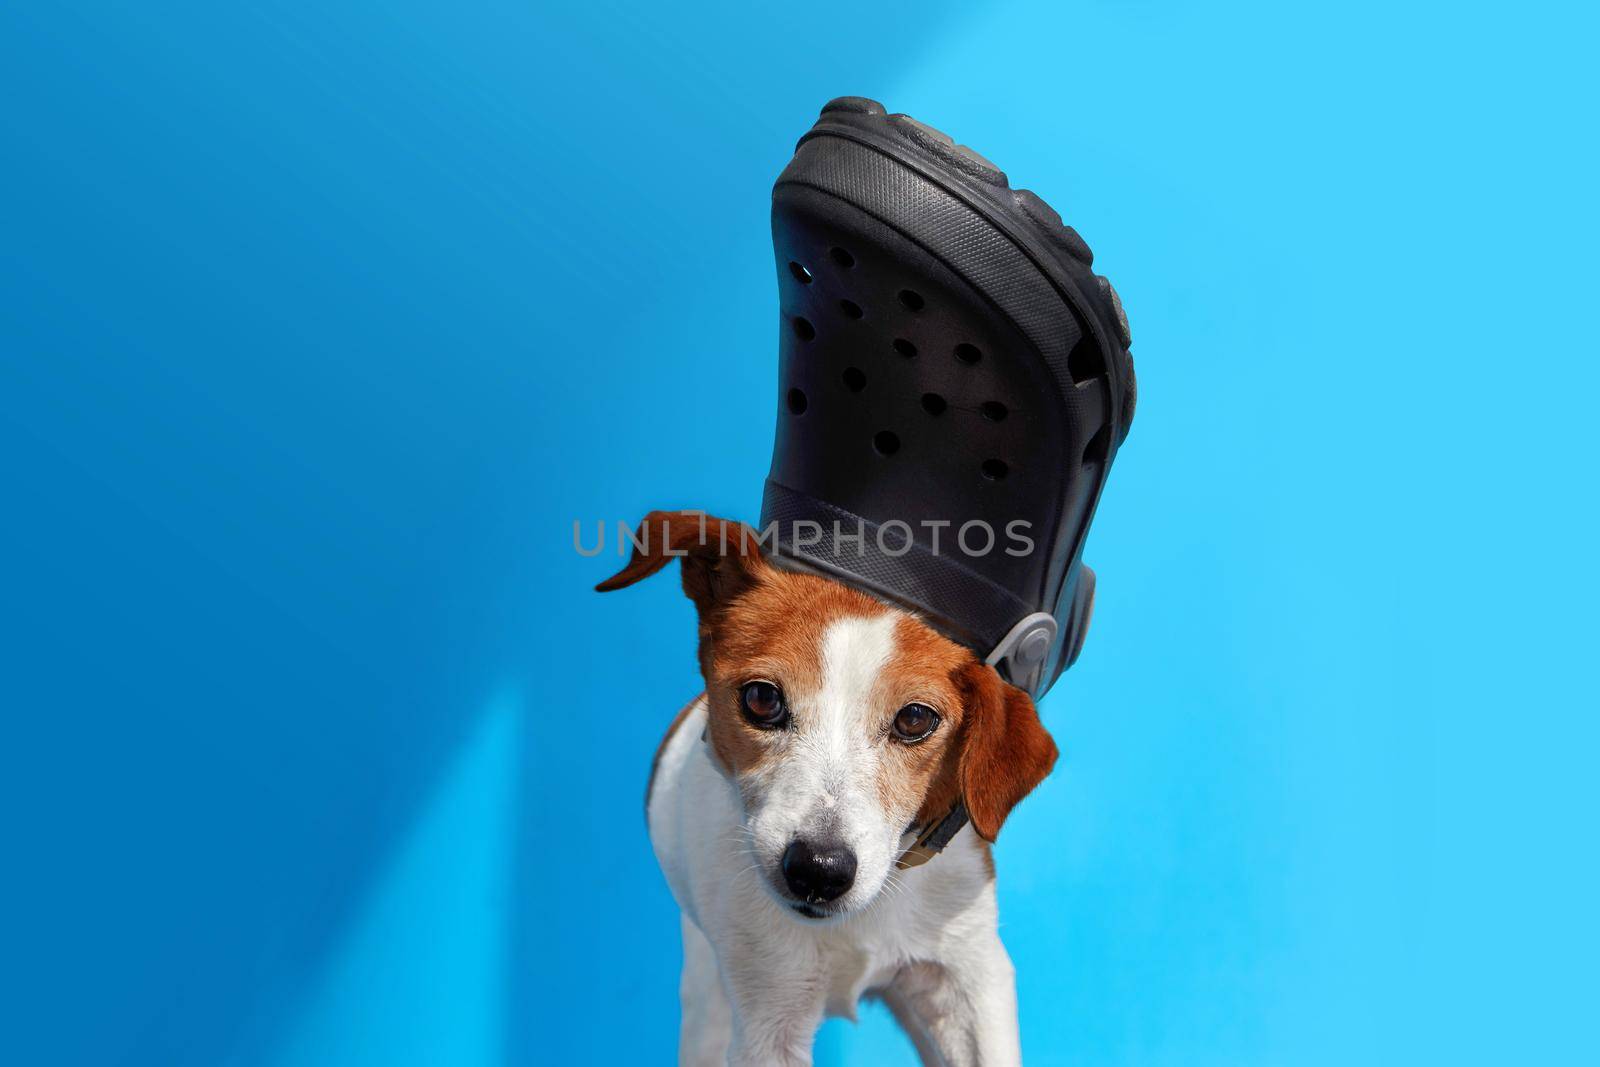 Cute spotted dog with black foam clog on head sticking out tongue and looking away against blue background